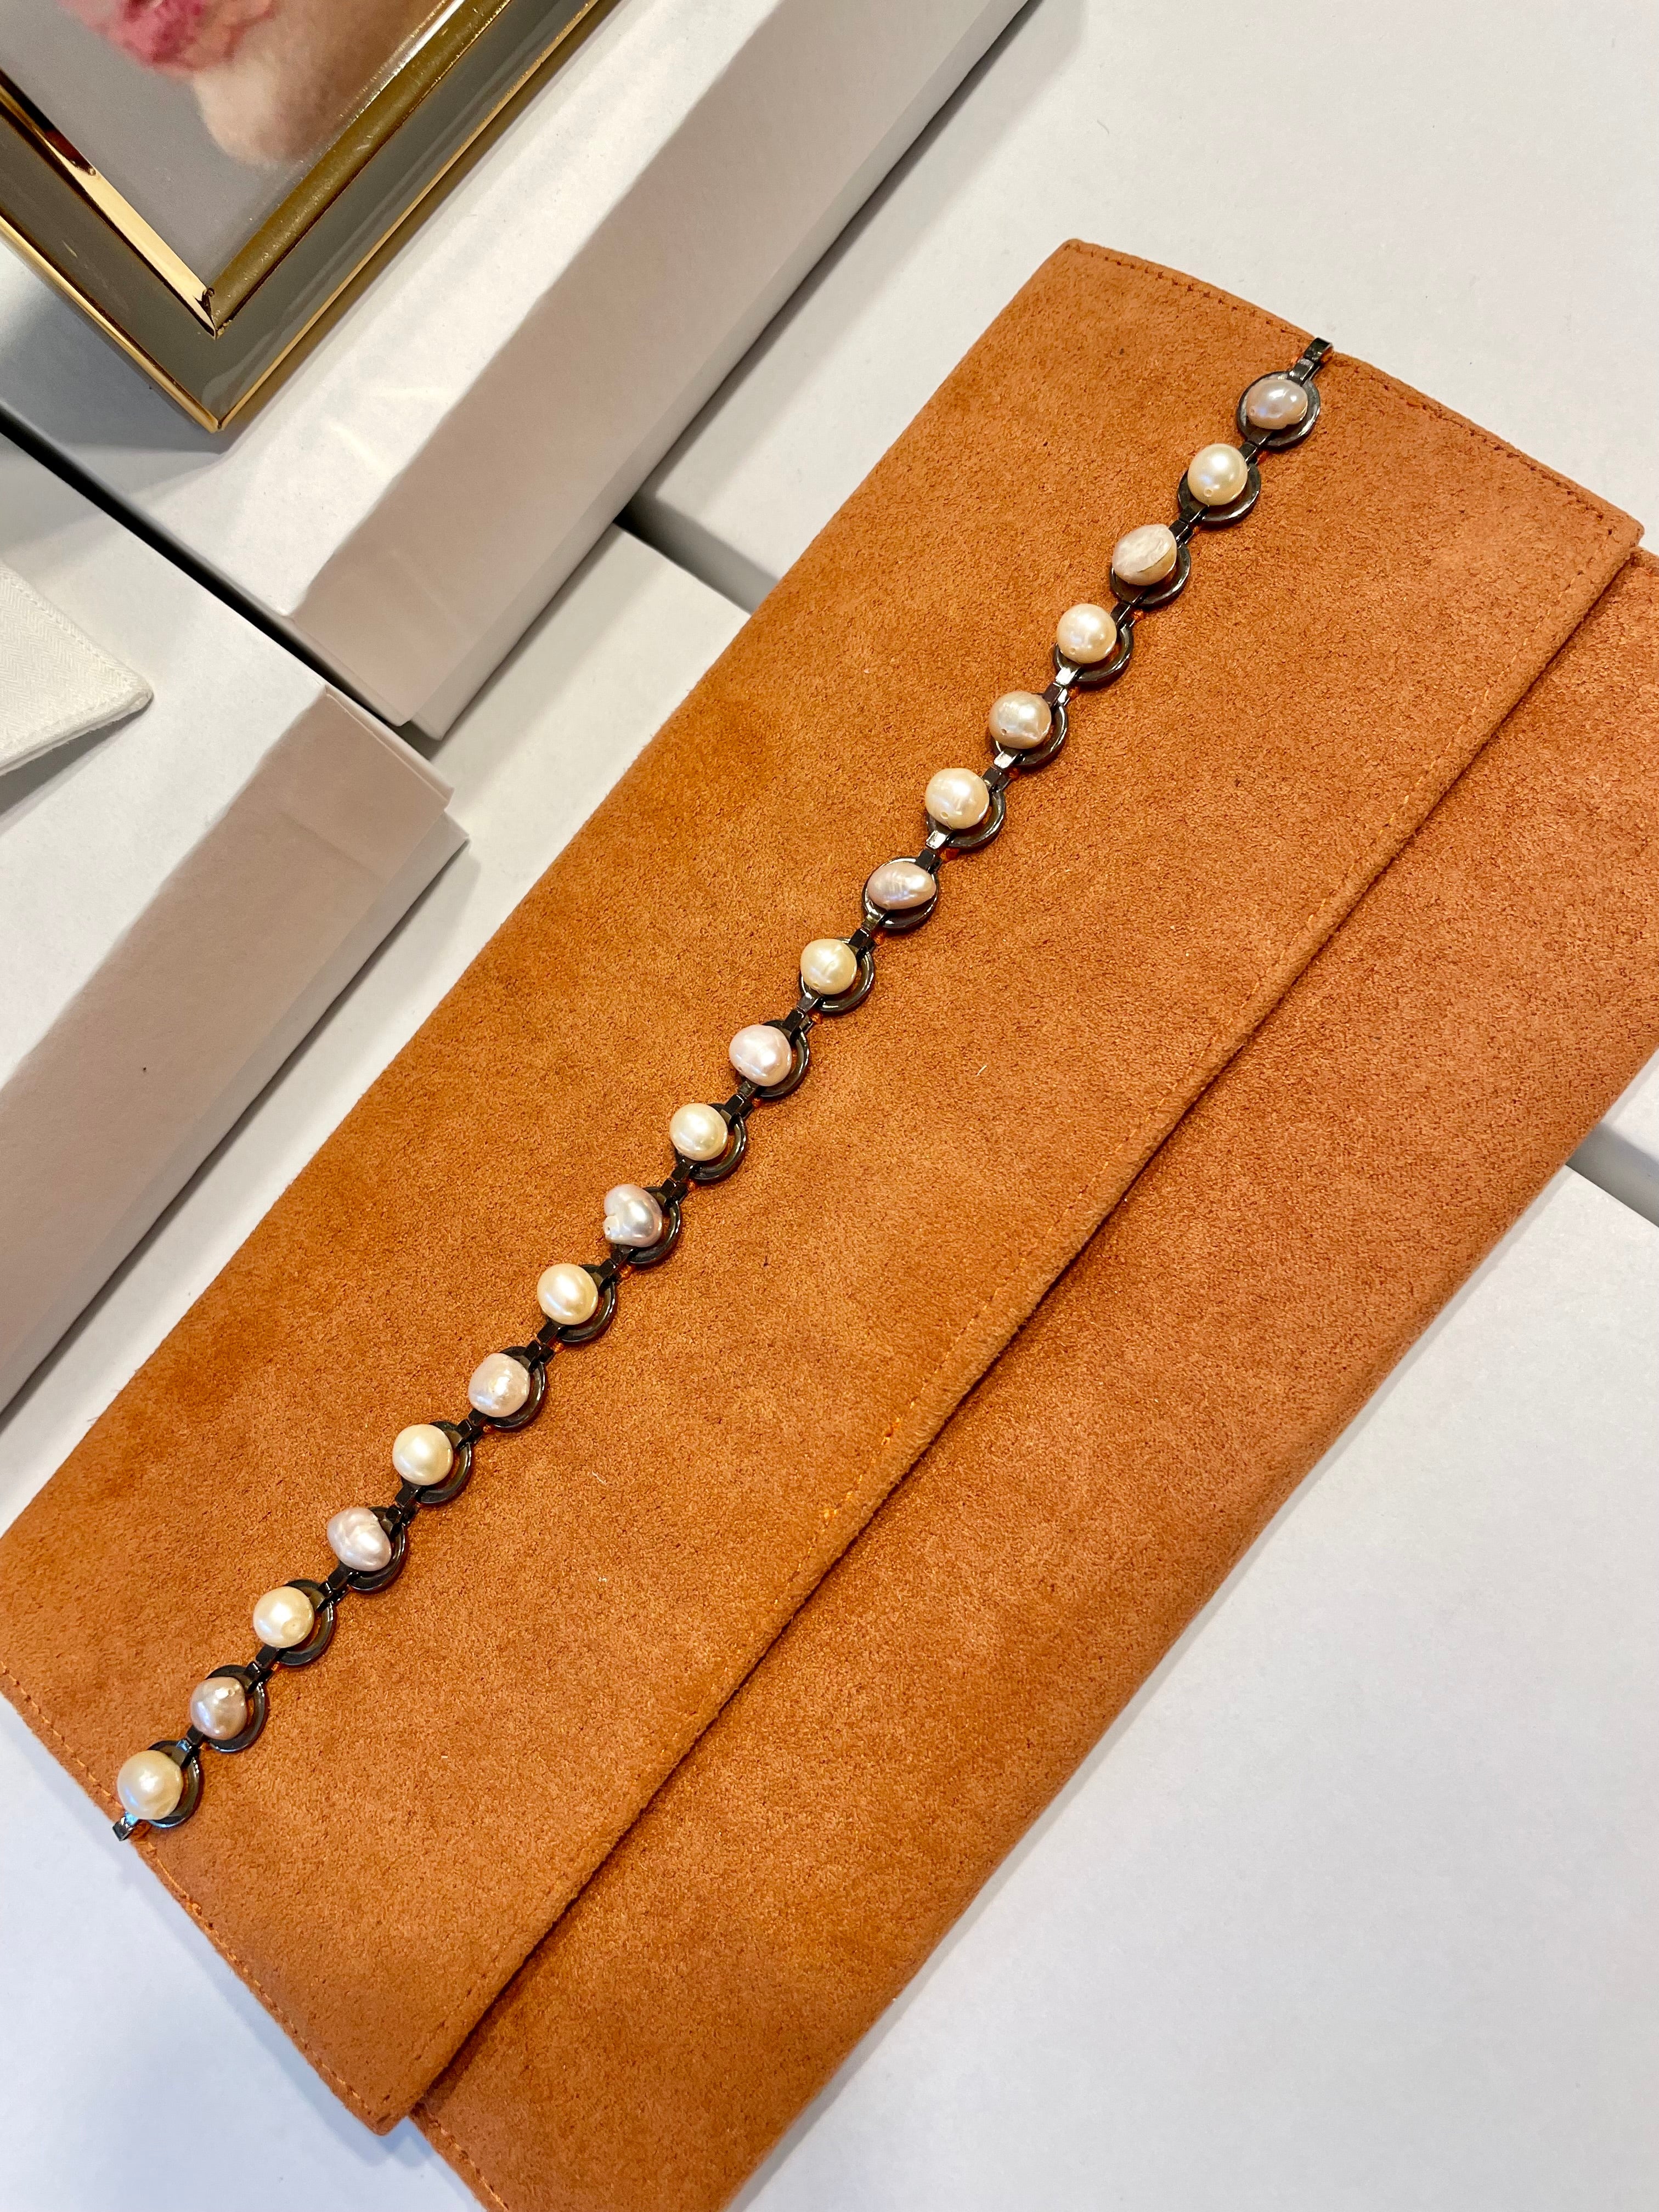 Isn't she Charming... she adores anything with pearls! This one of a kind fresh water pearl clutch, is so chic!